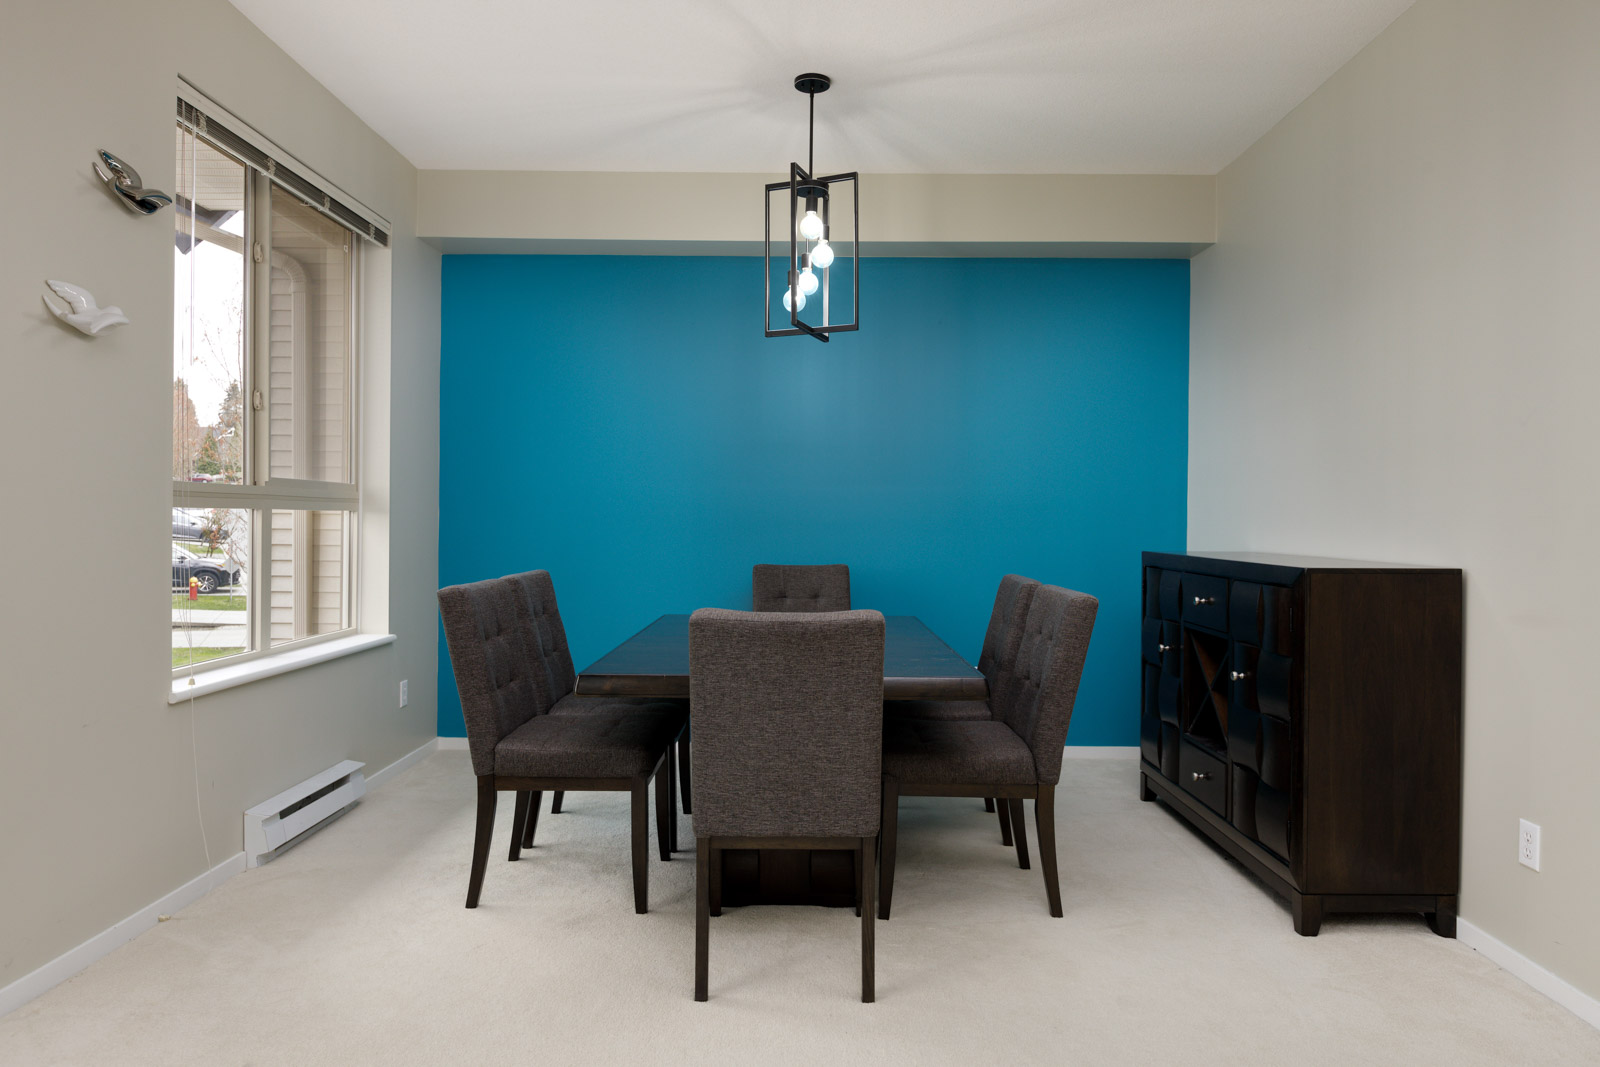 dining room with dark 6 person dining set with a medium blue accent wall and hanging light fixture